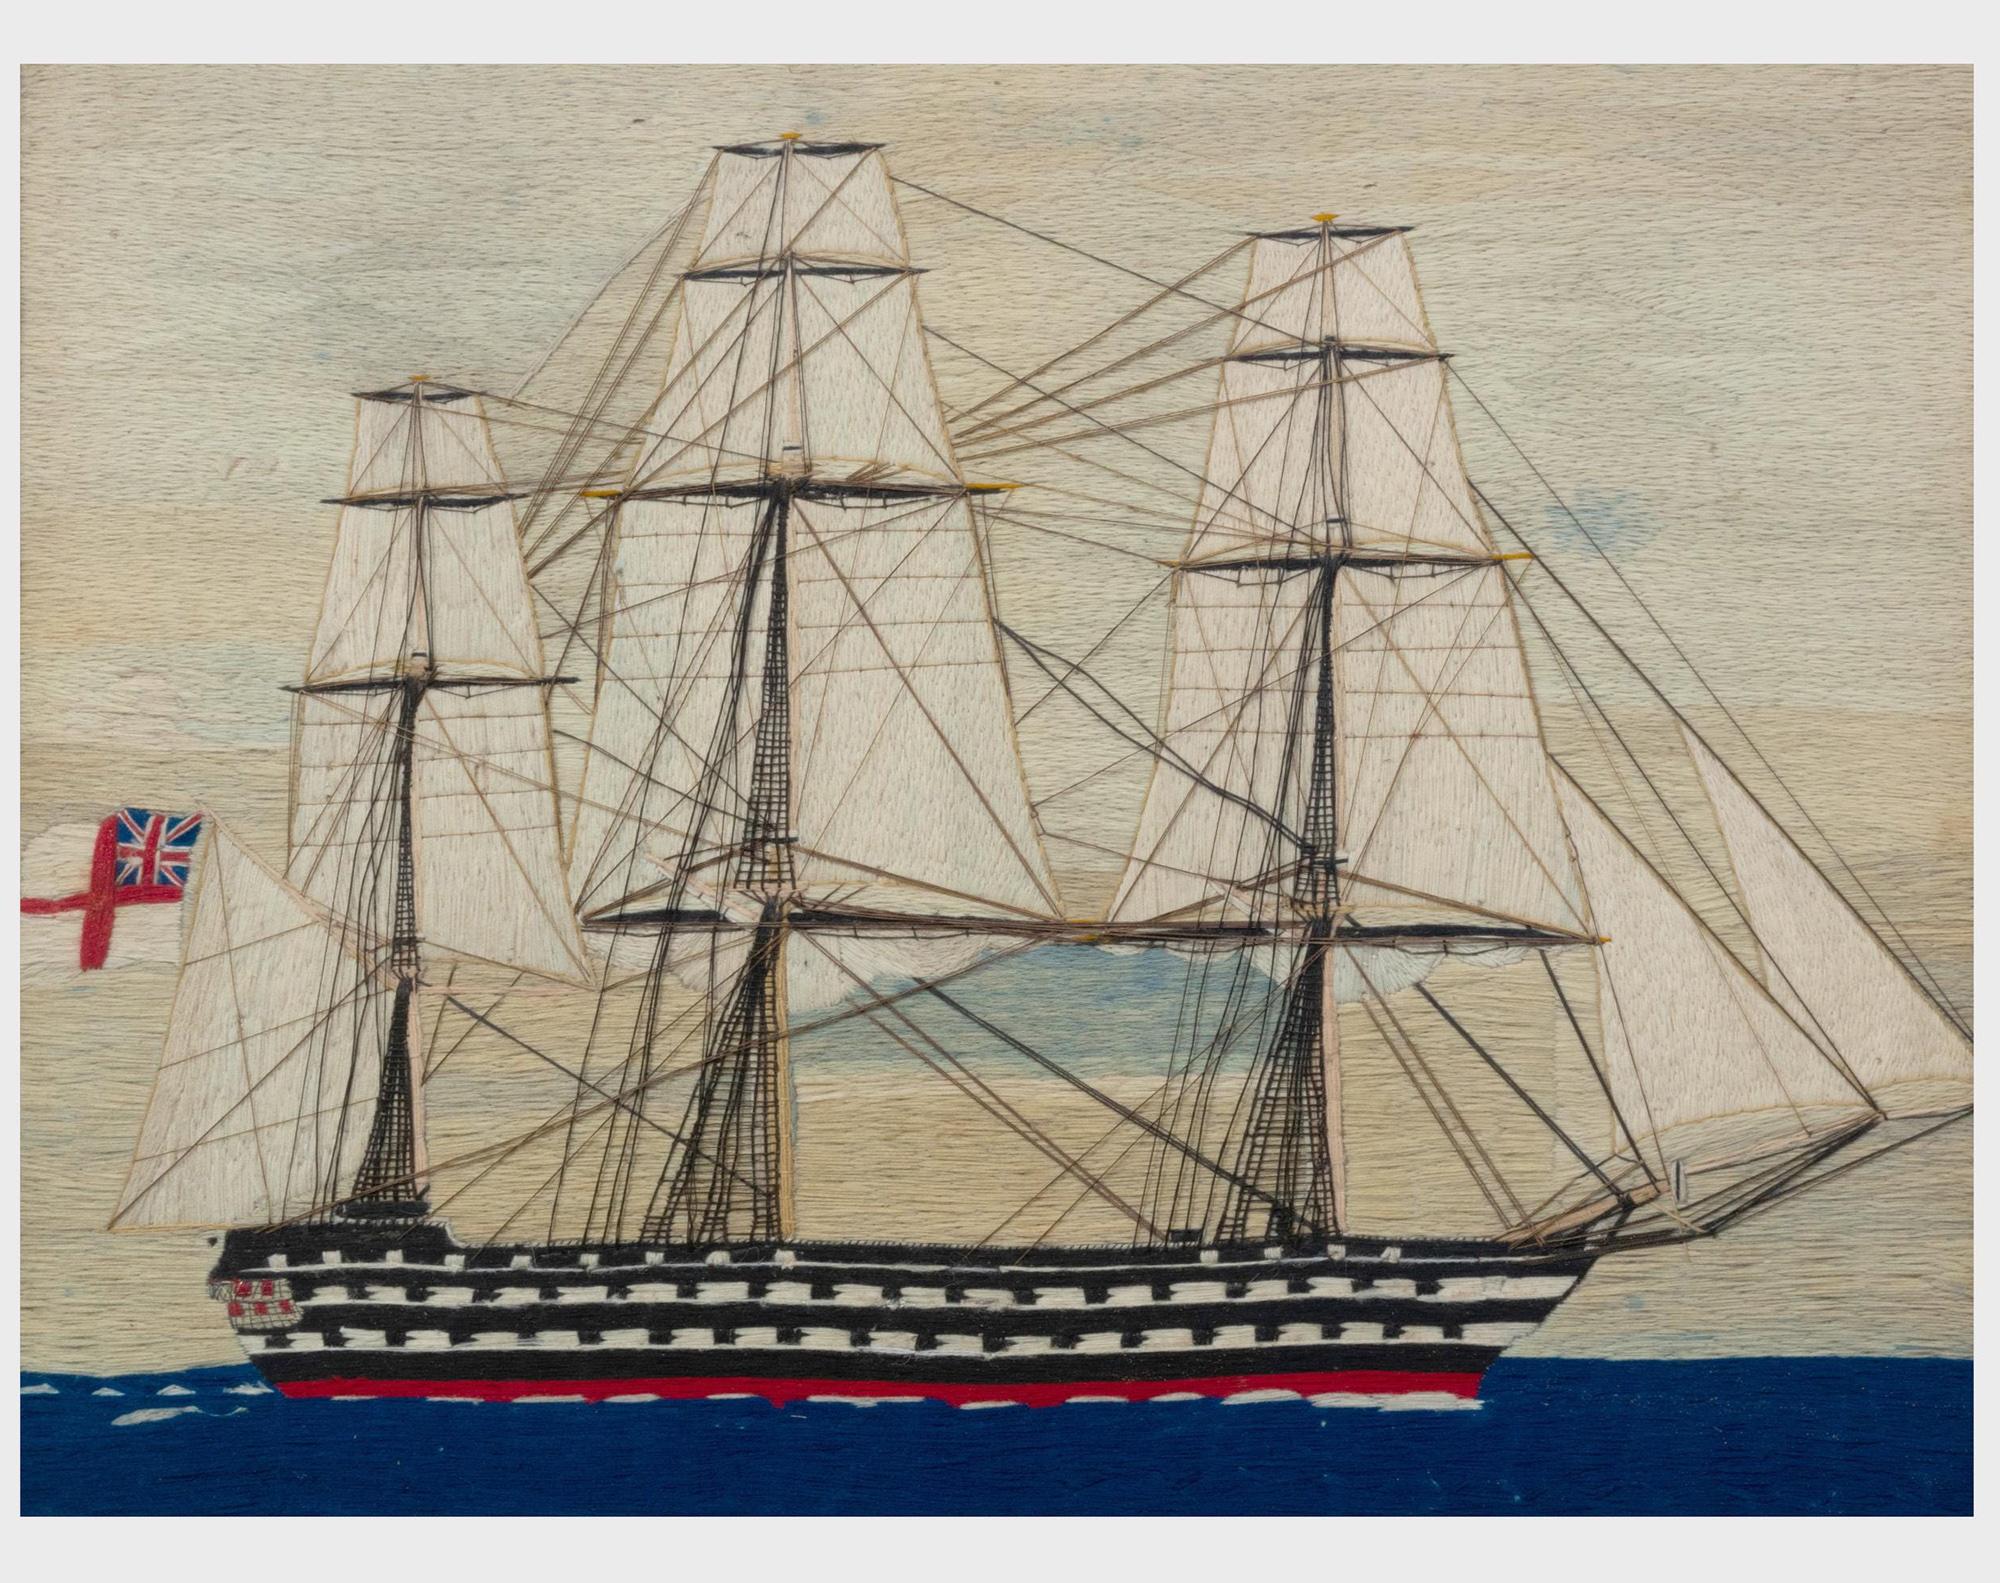 English Sailor's Woolwork of a Battleship,
Circa 1865-75.

The sailor's woolie depicts a starboard side view of a second rate battleship flying the White ensign under sail.  White sea caps break against the hull as she sails under a gray sky.  The